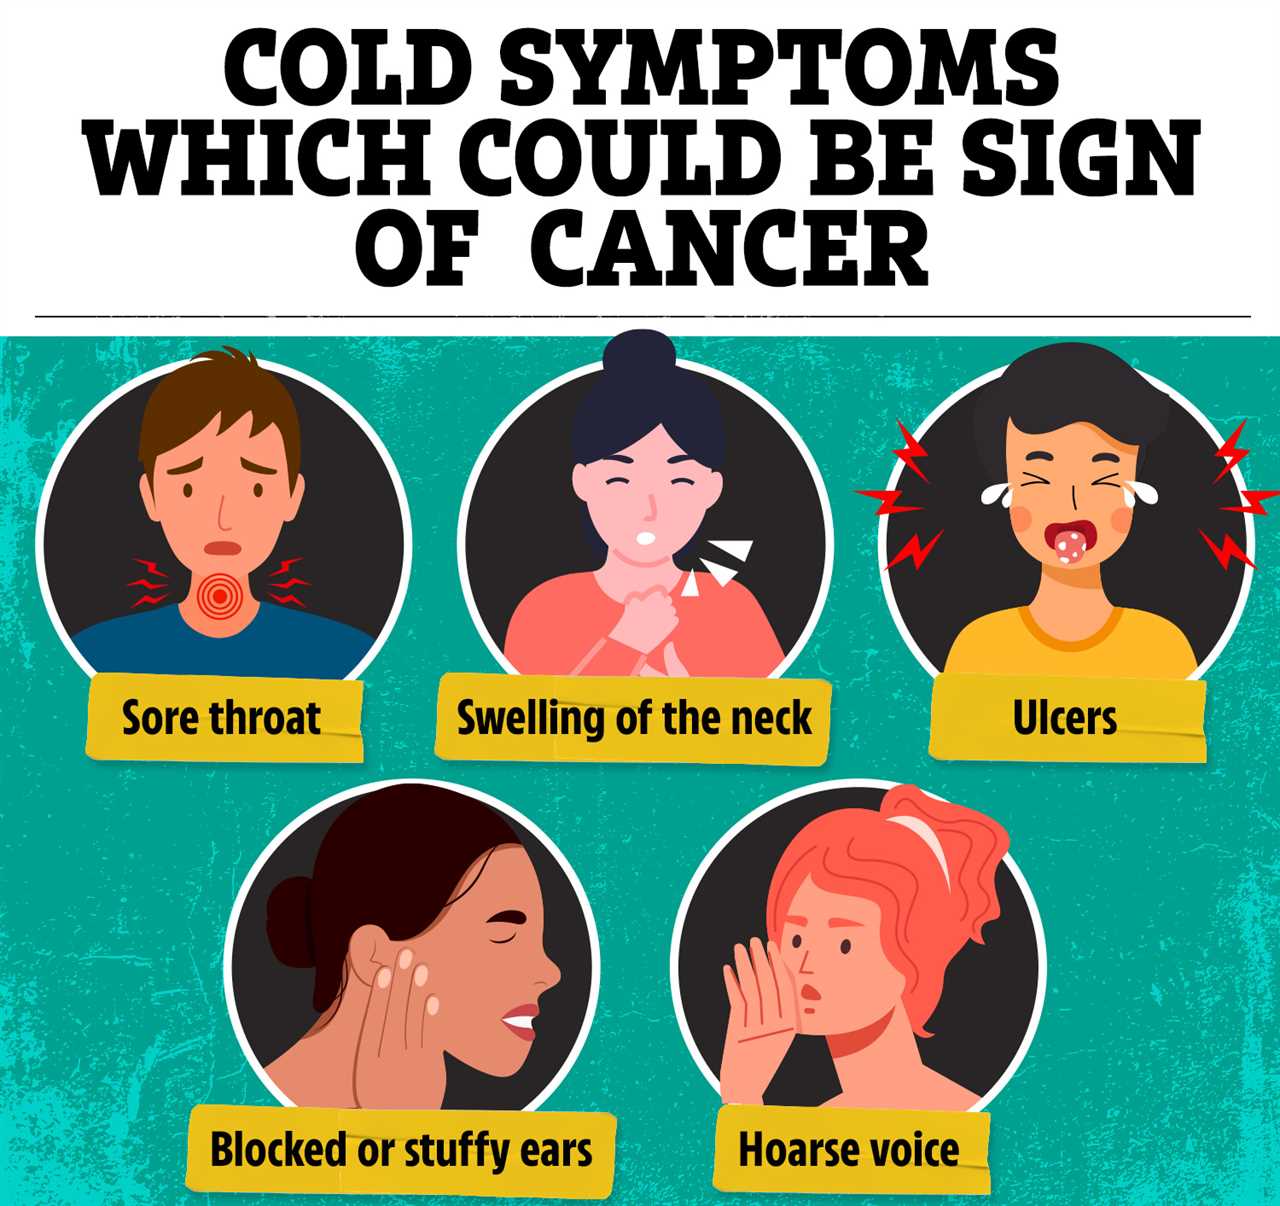 The common cold symptoms that could be a sign of cancer